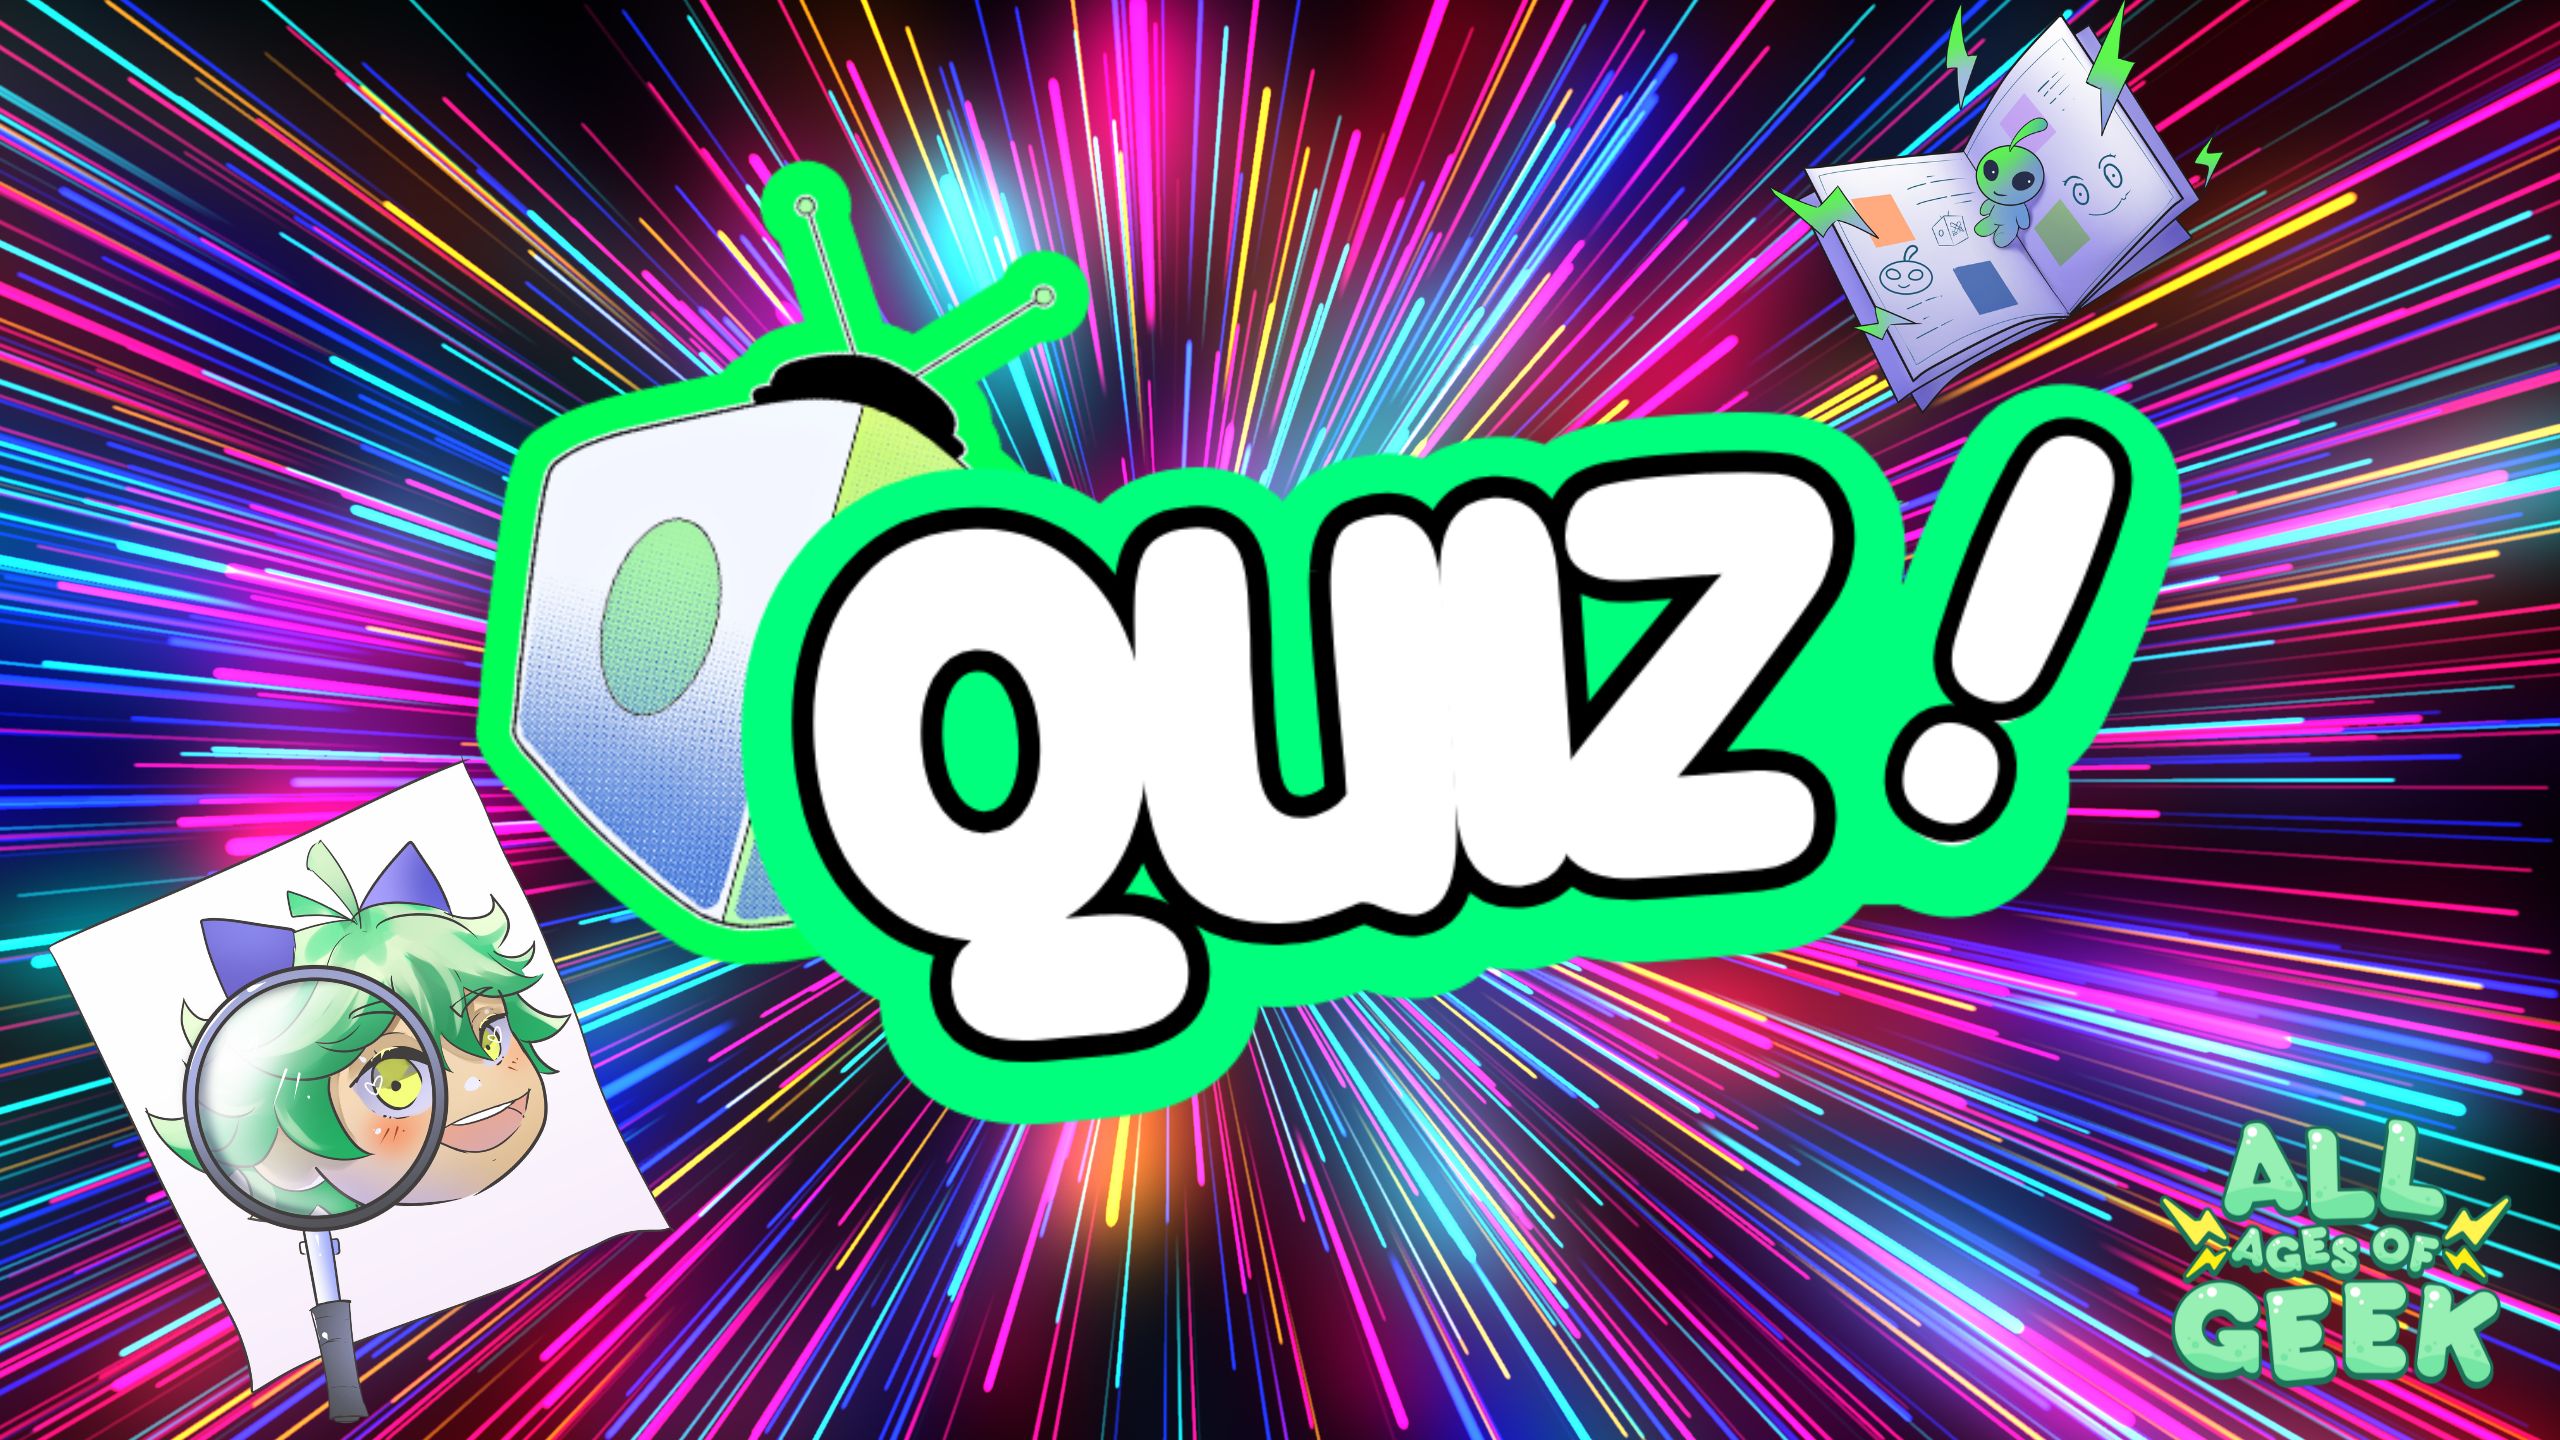 The image features a dynamic, colorful background with streaks of light radiating outwards, creating a vibrant and energetic effect. In the center, the word "Quiz!" is prominently displayed in large, bold, white letters with a green outline. To the left, there's an illustration of a character with green hair and cat ears, partially obscured by a magnifying glass. To the right, there is an open book with illustrations and green lightning bolts coming from it. The "All Ages of Geek" logo is positioned in the bottom right corner.